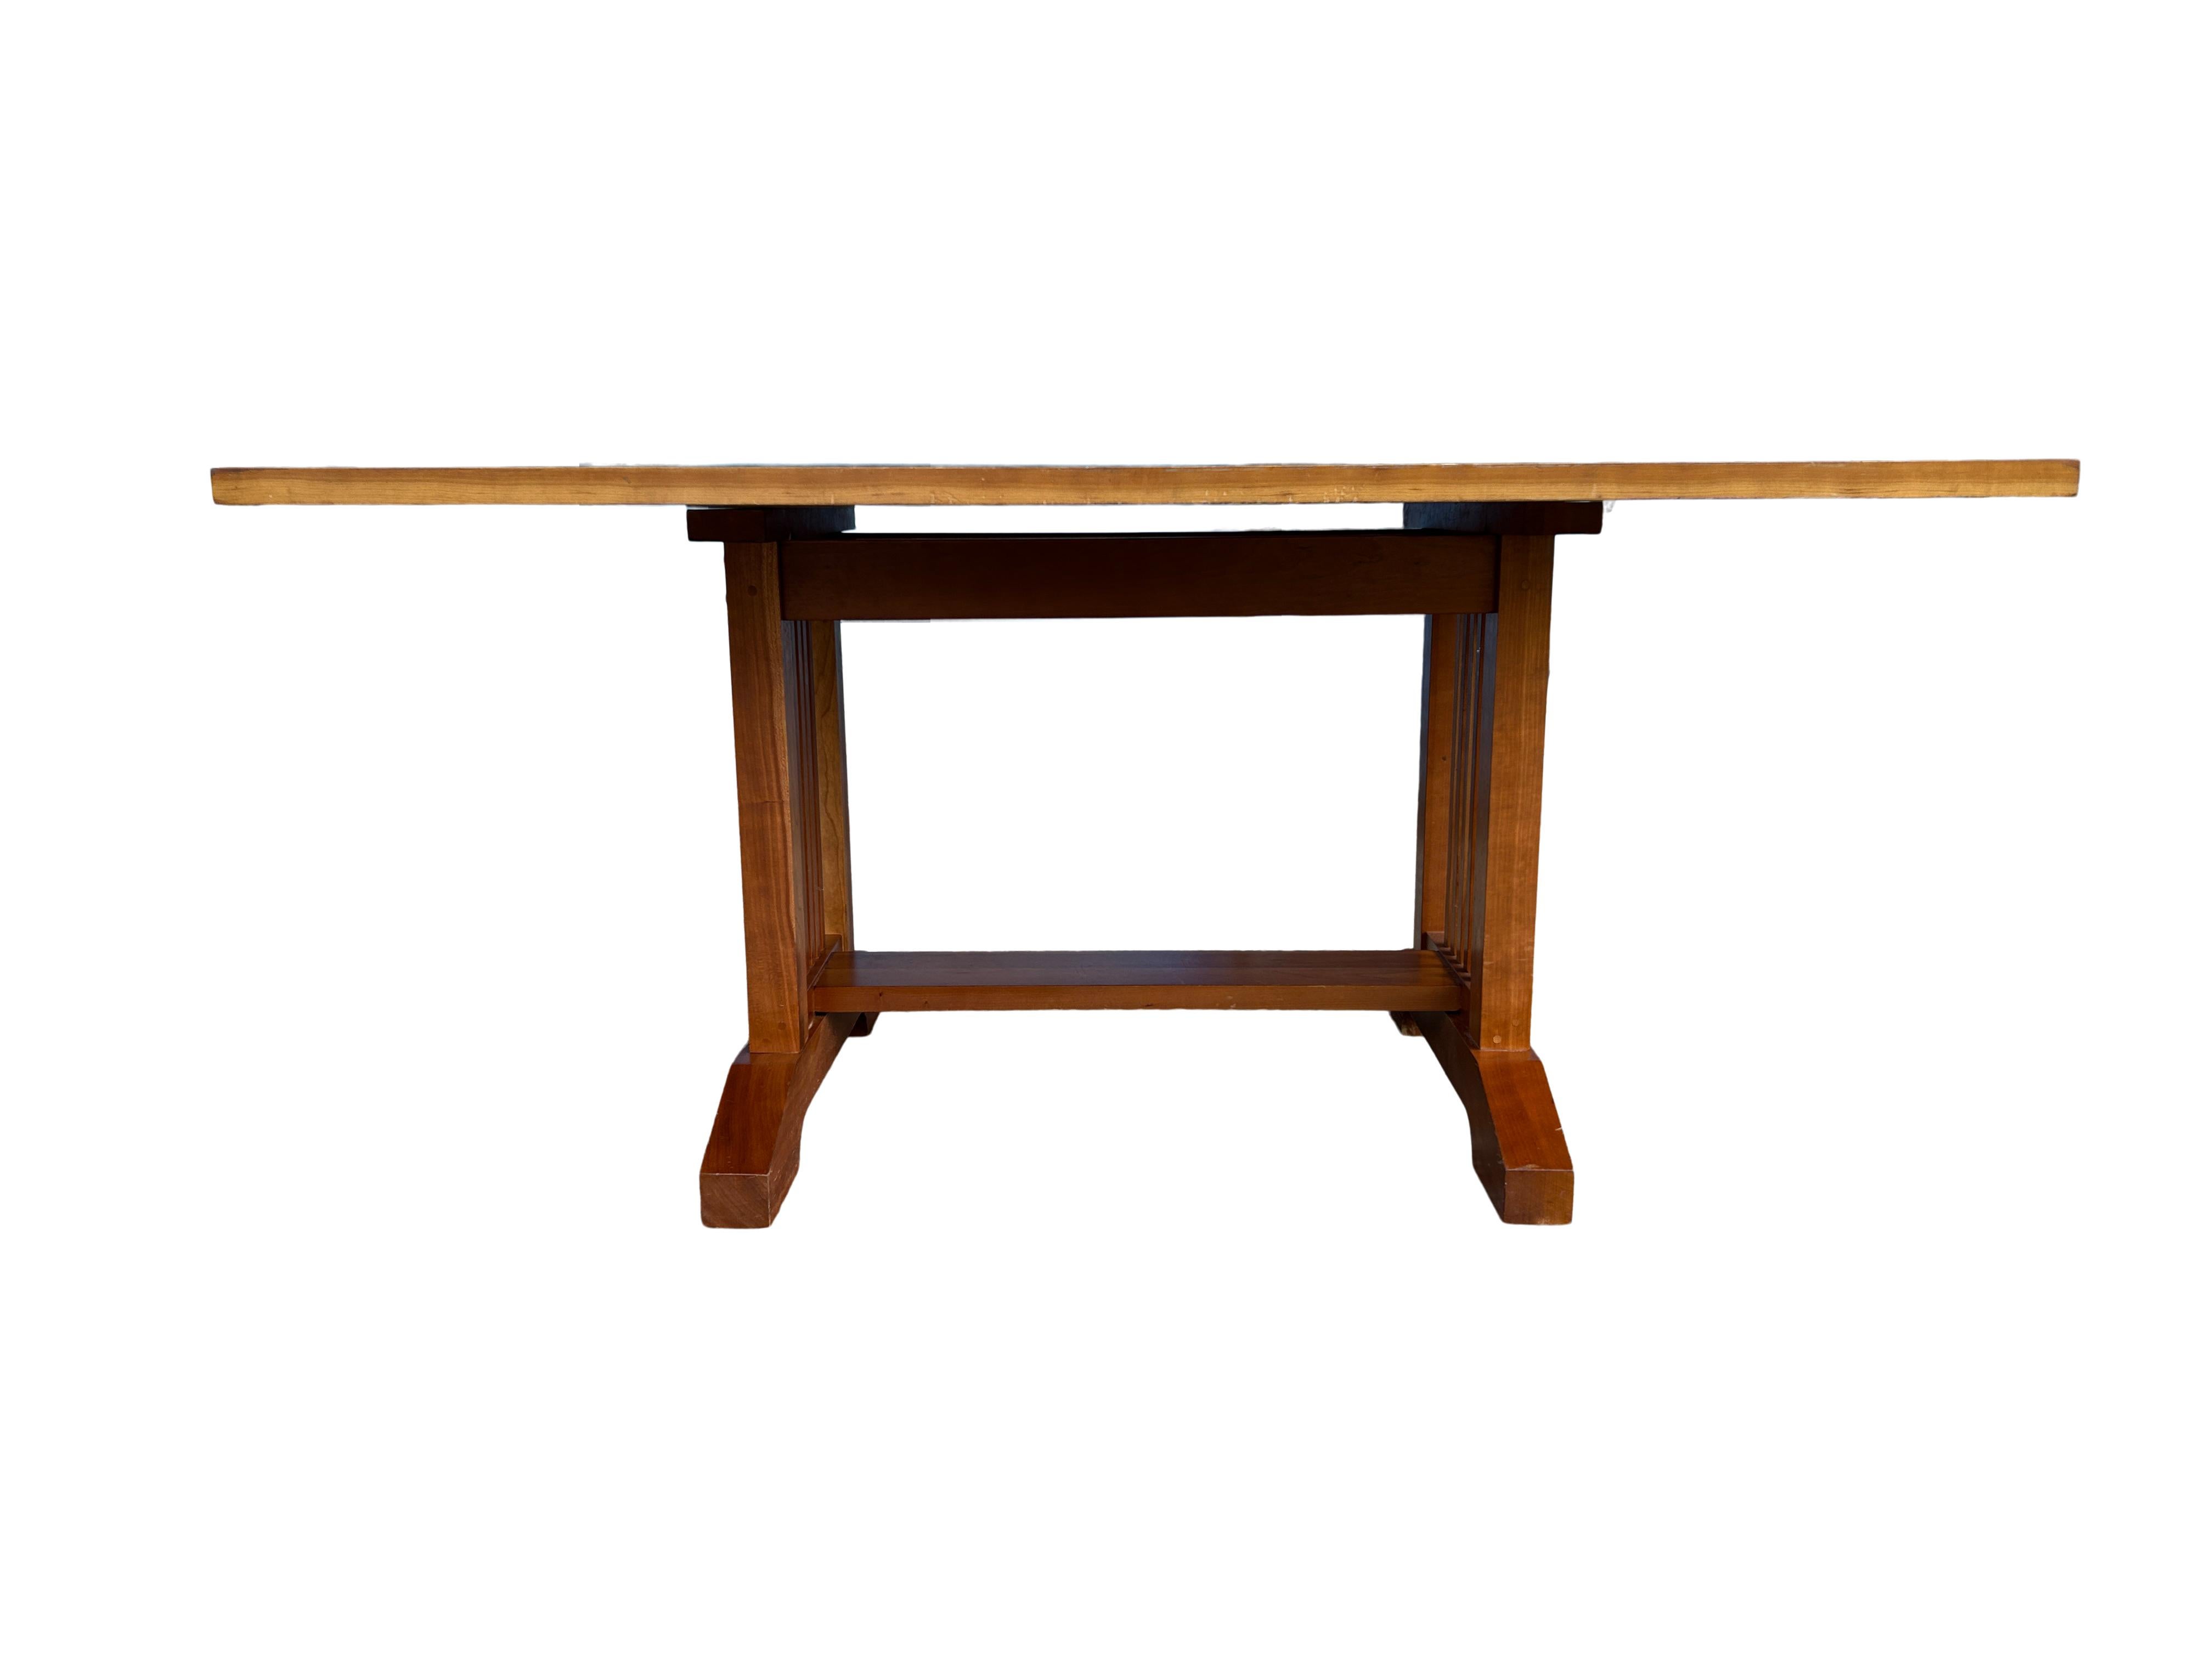 Studio craft rectangle solid cherry dining table made in USA. All handcrafted dining table. Beautiful solid cherry Mission style base Style of Frank Lloyd Wright. The table top measures 1.250